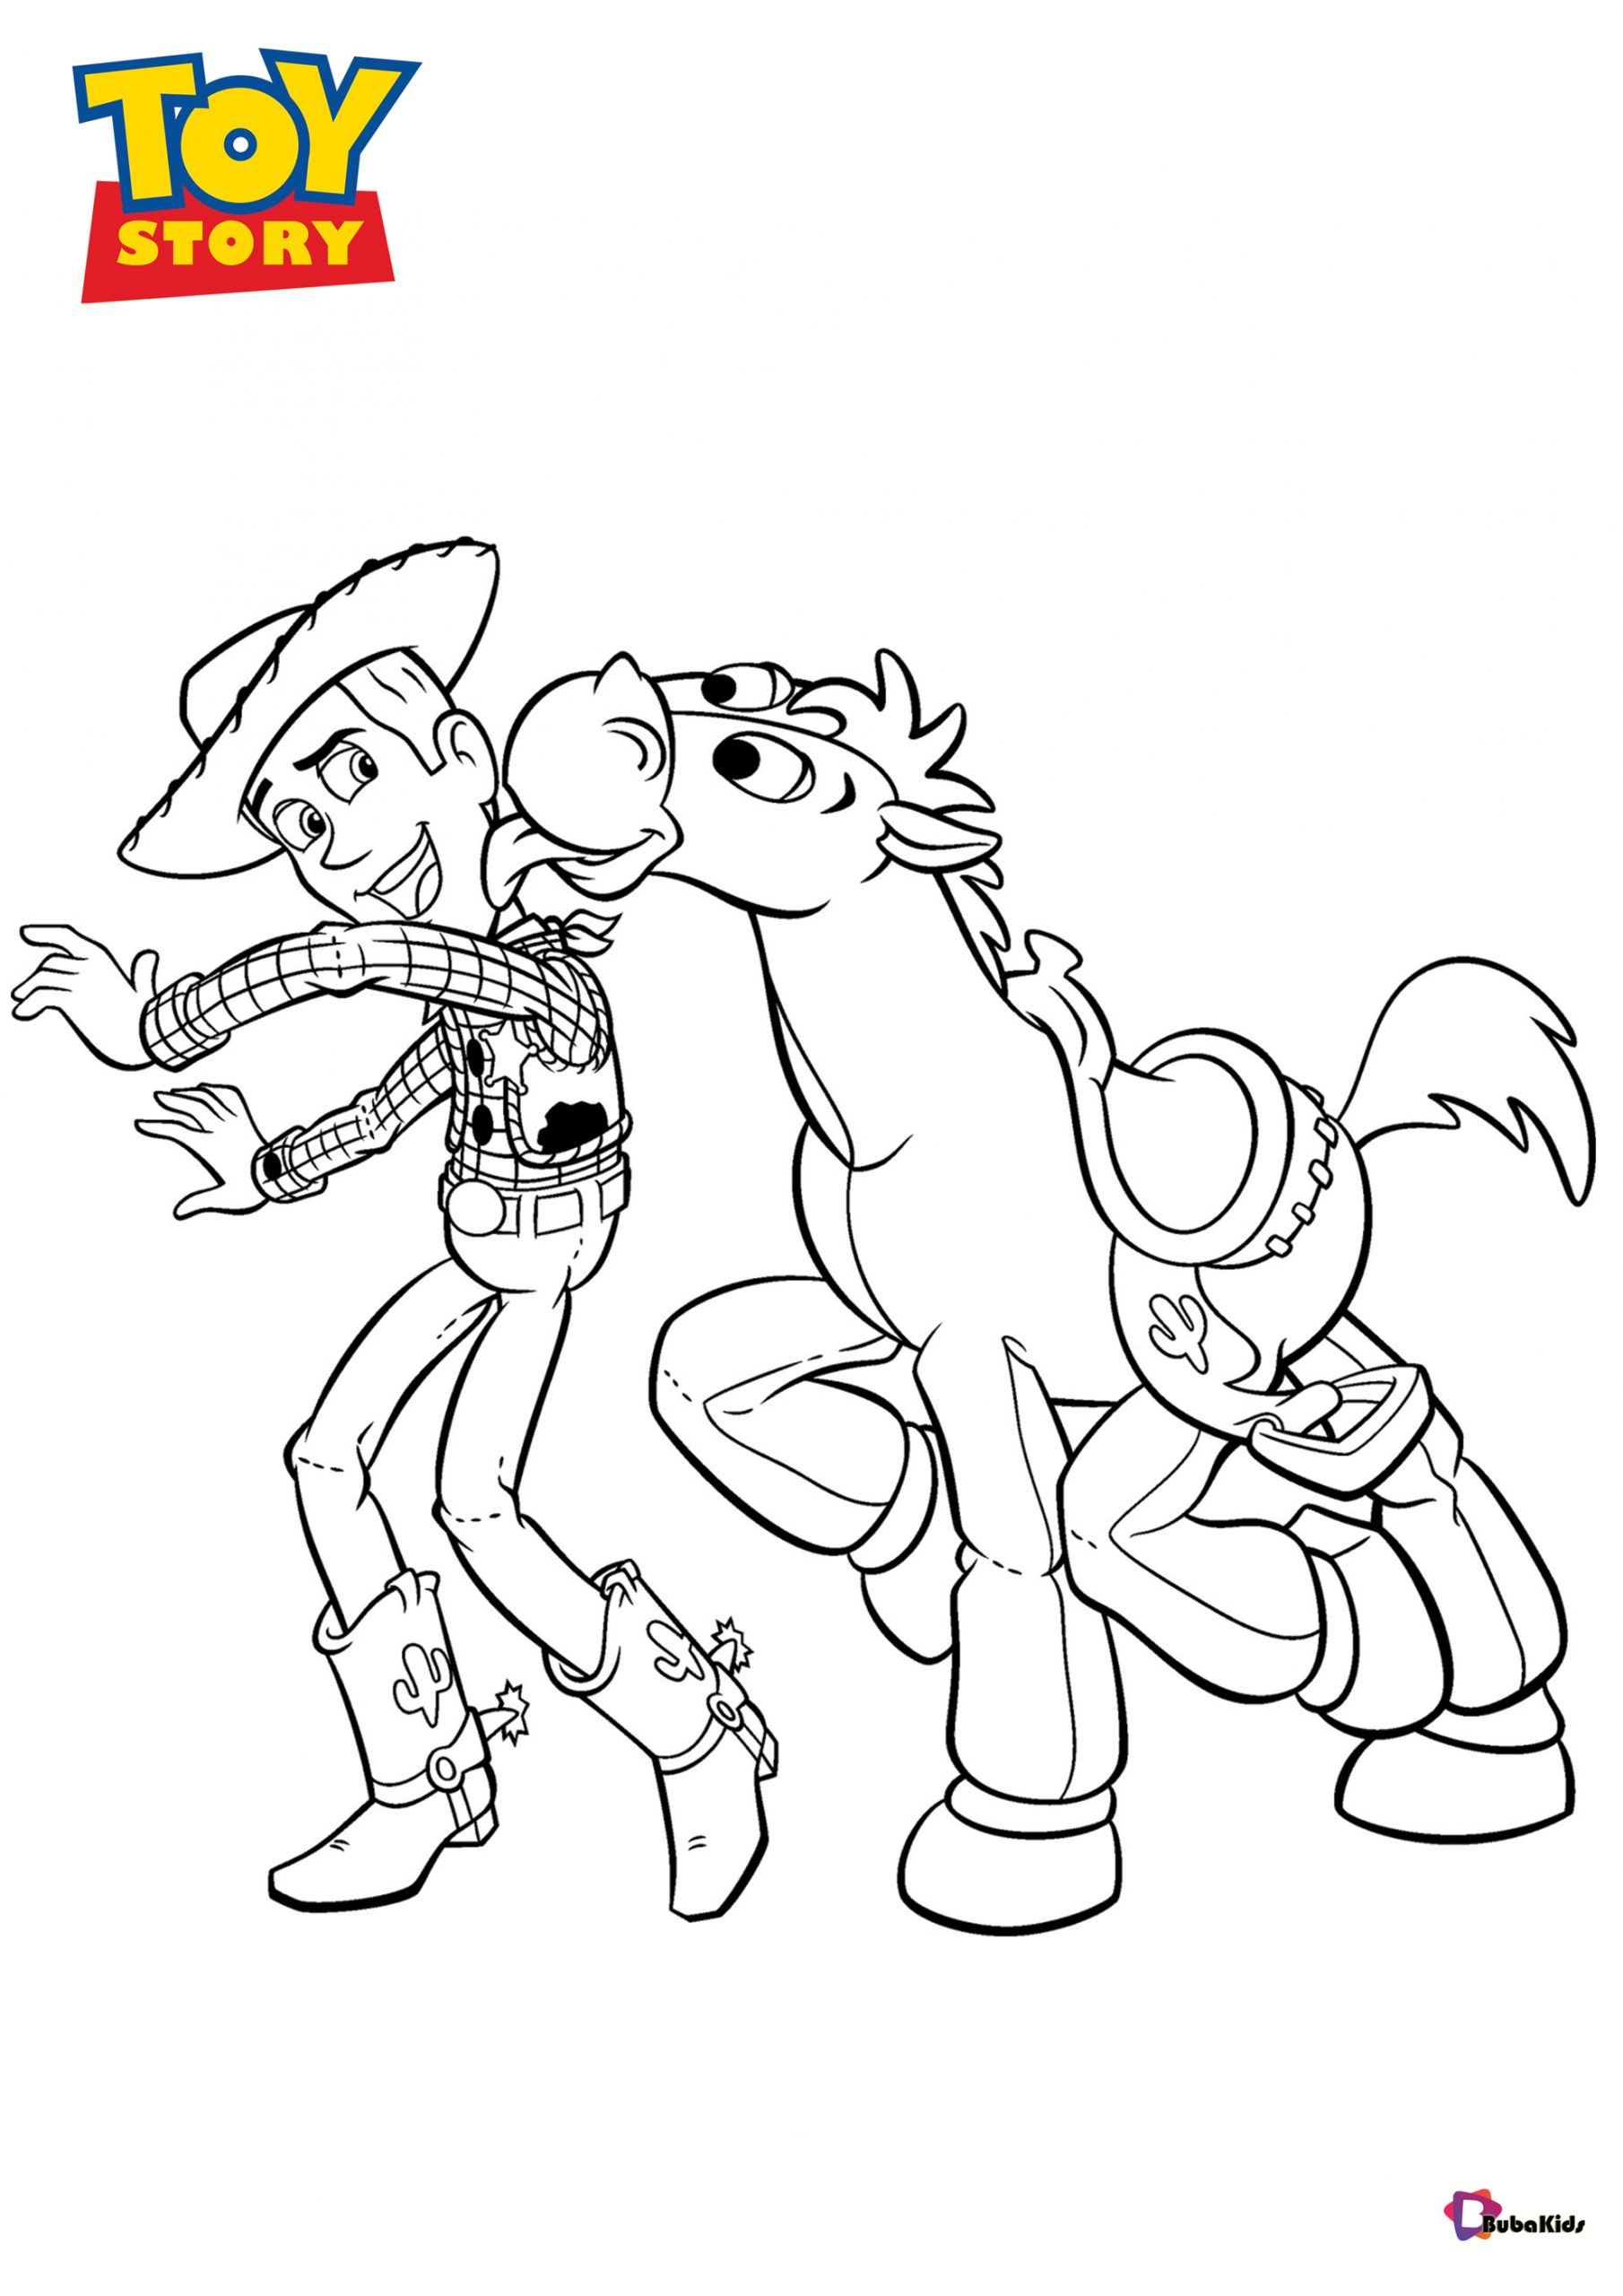 Sheriff Woody coloring page from Toy Story printable coloring pages for kids